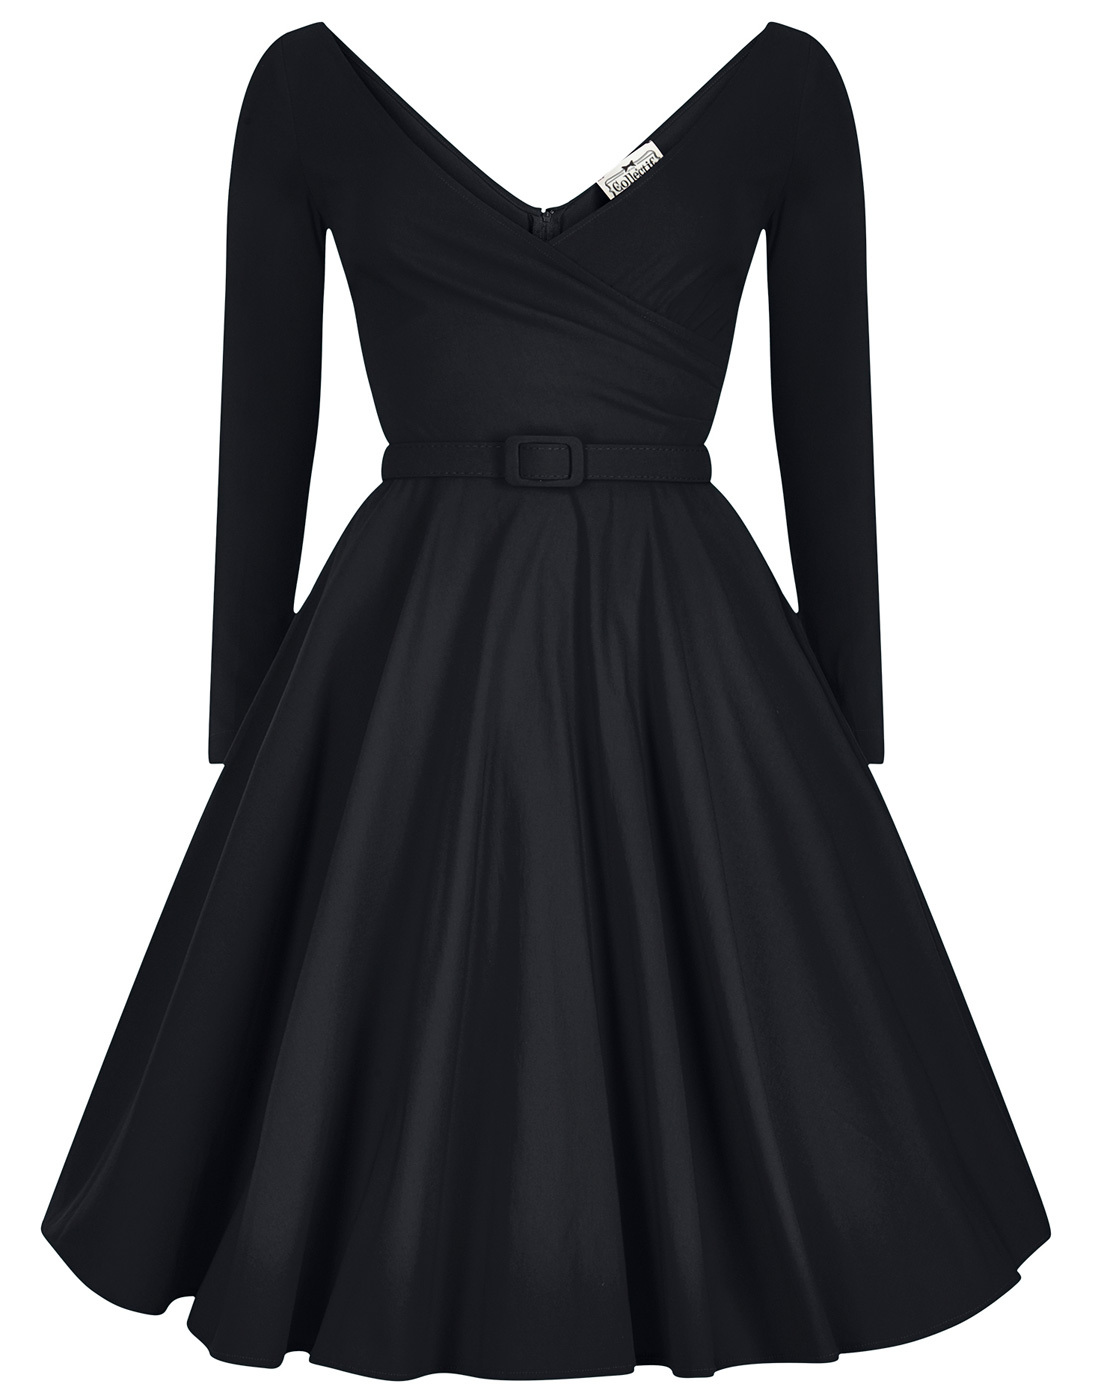 Nicky COLLECTIF Retro Vintage 50s Party Doll Dress